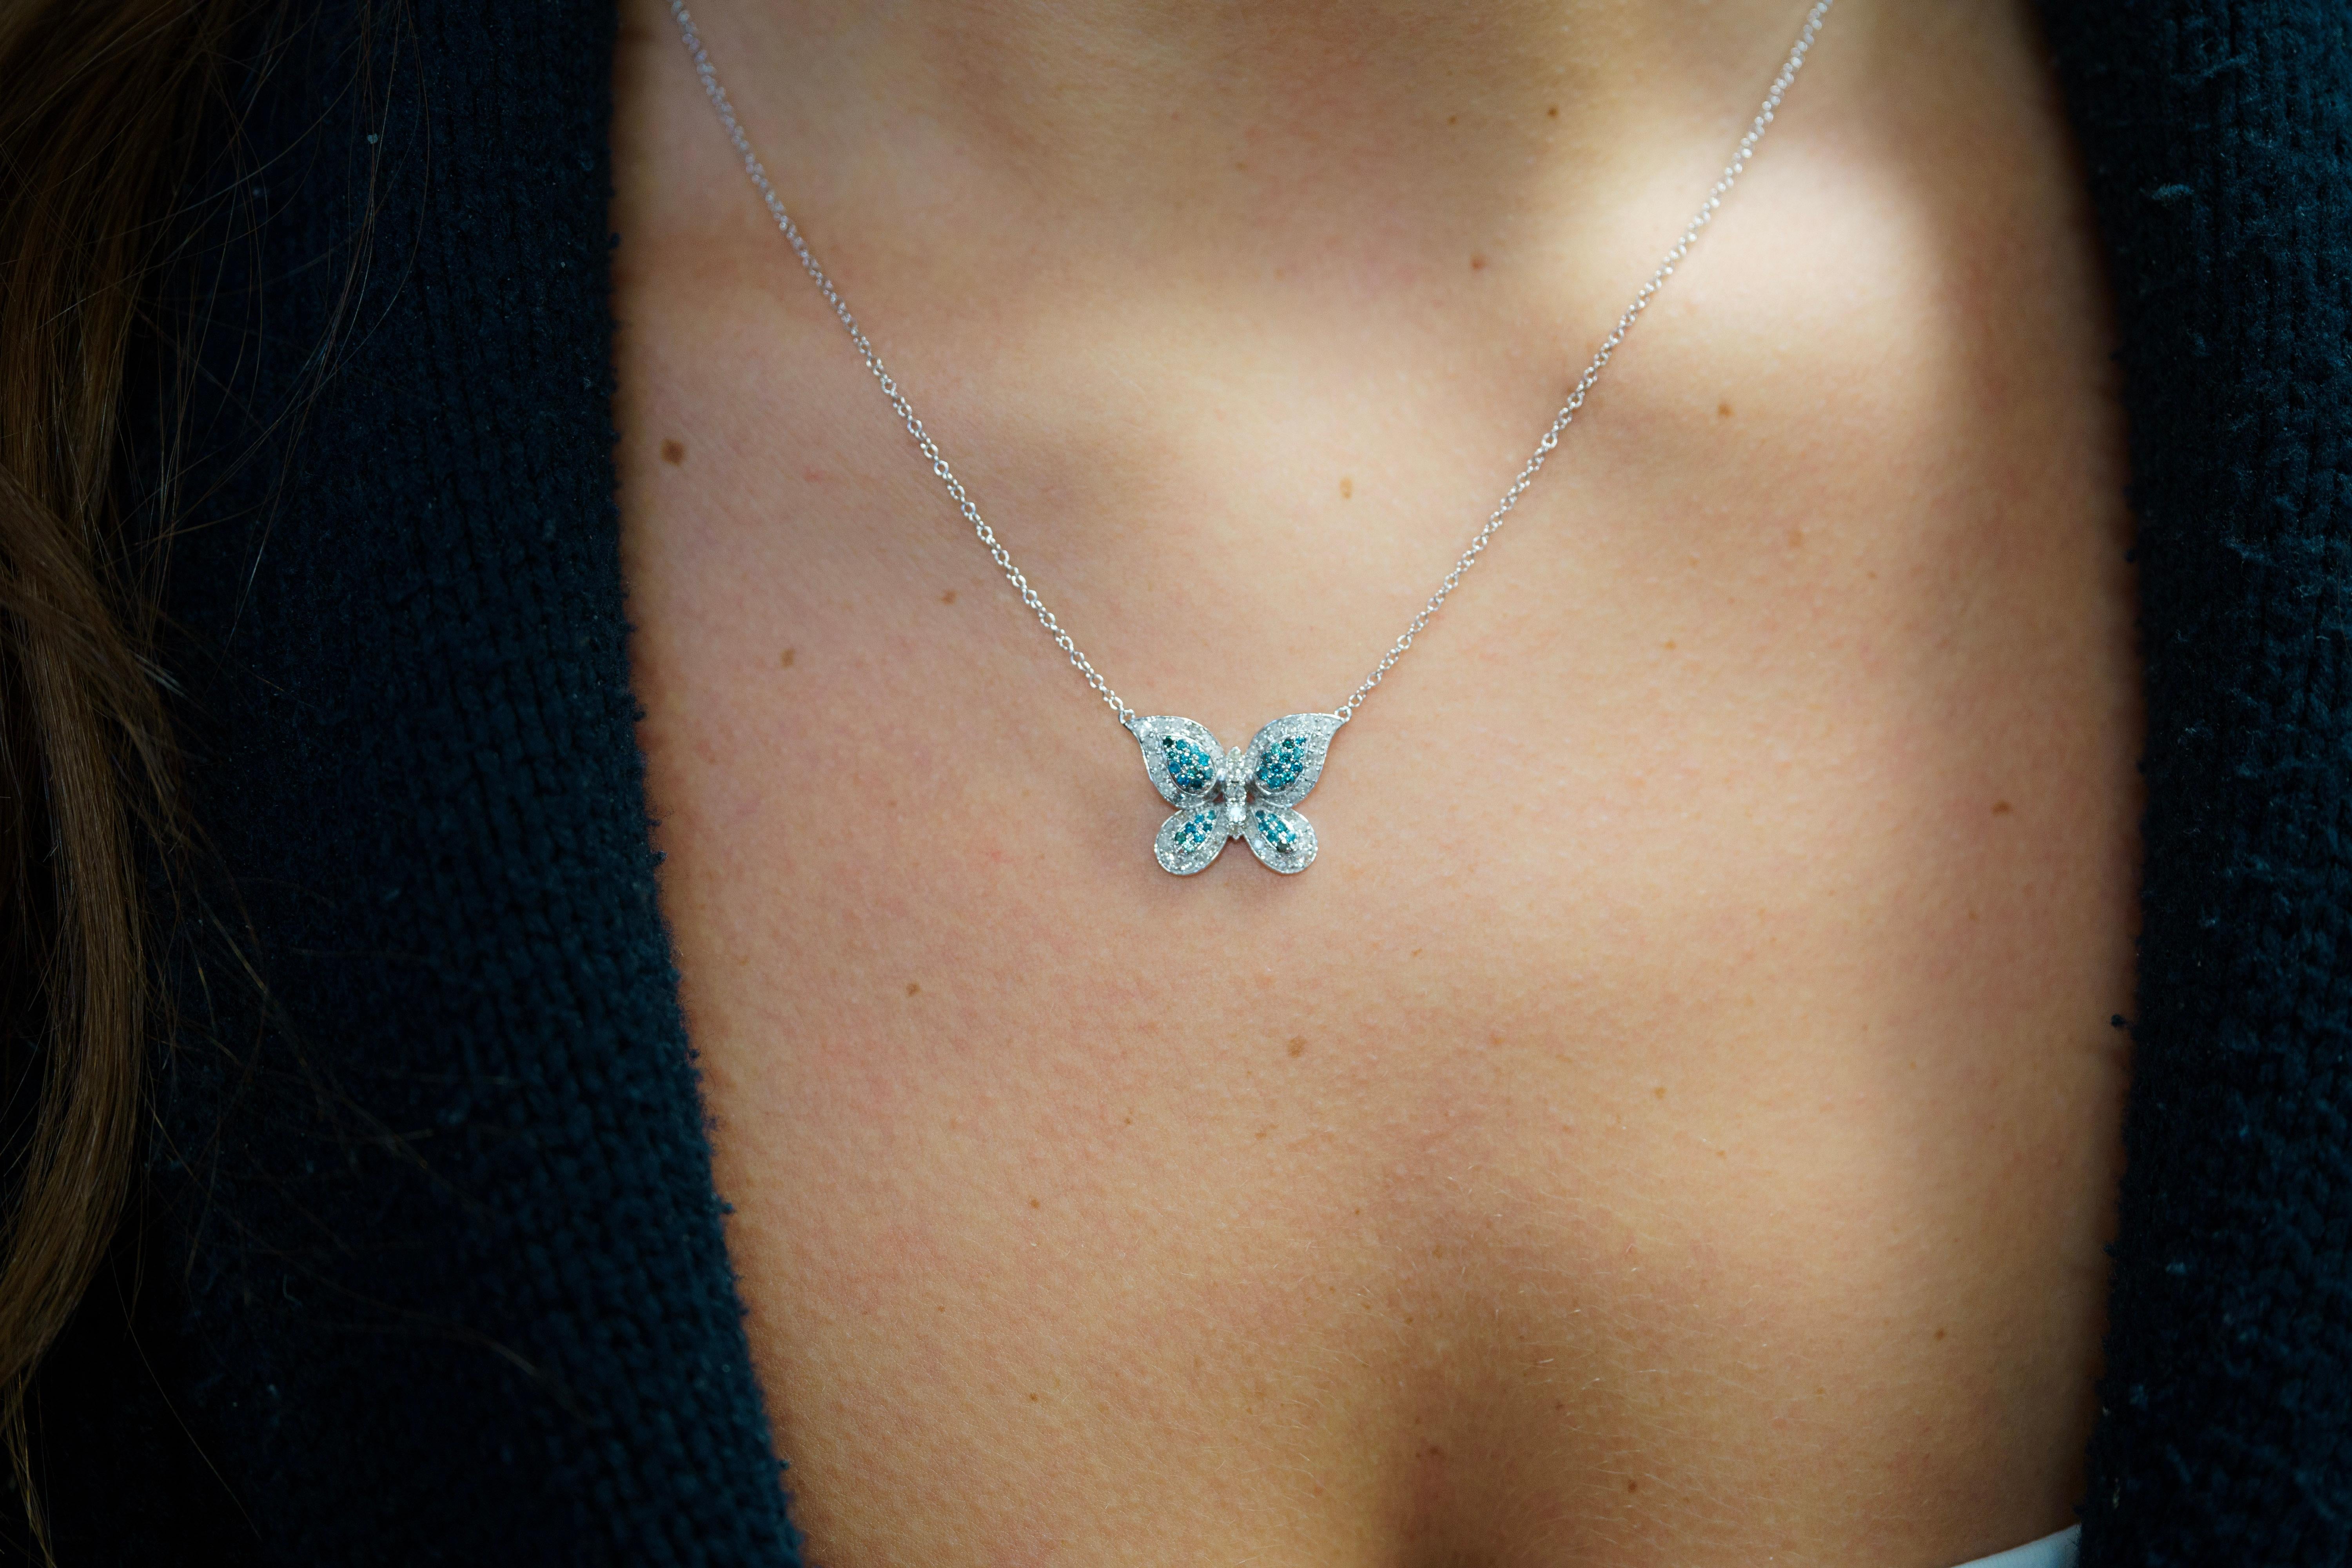 Natural Blue and White Diamond Butterfly Motif Cluster Pendant Necklace in 14K Solid White Gold. Fixed on a connecting double-bail setting that floats as it rests on the neck.

Featuring a wonderfully hand-set cluster of natural blue and white